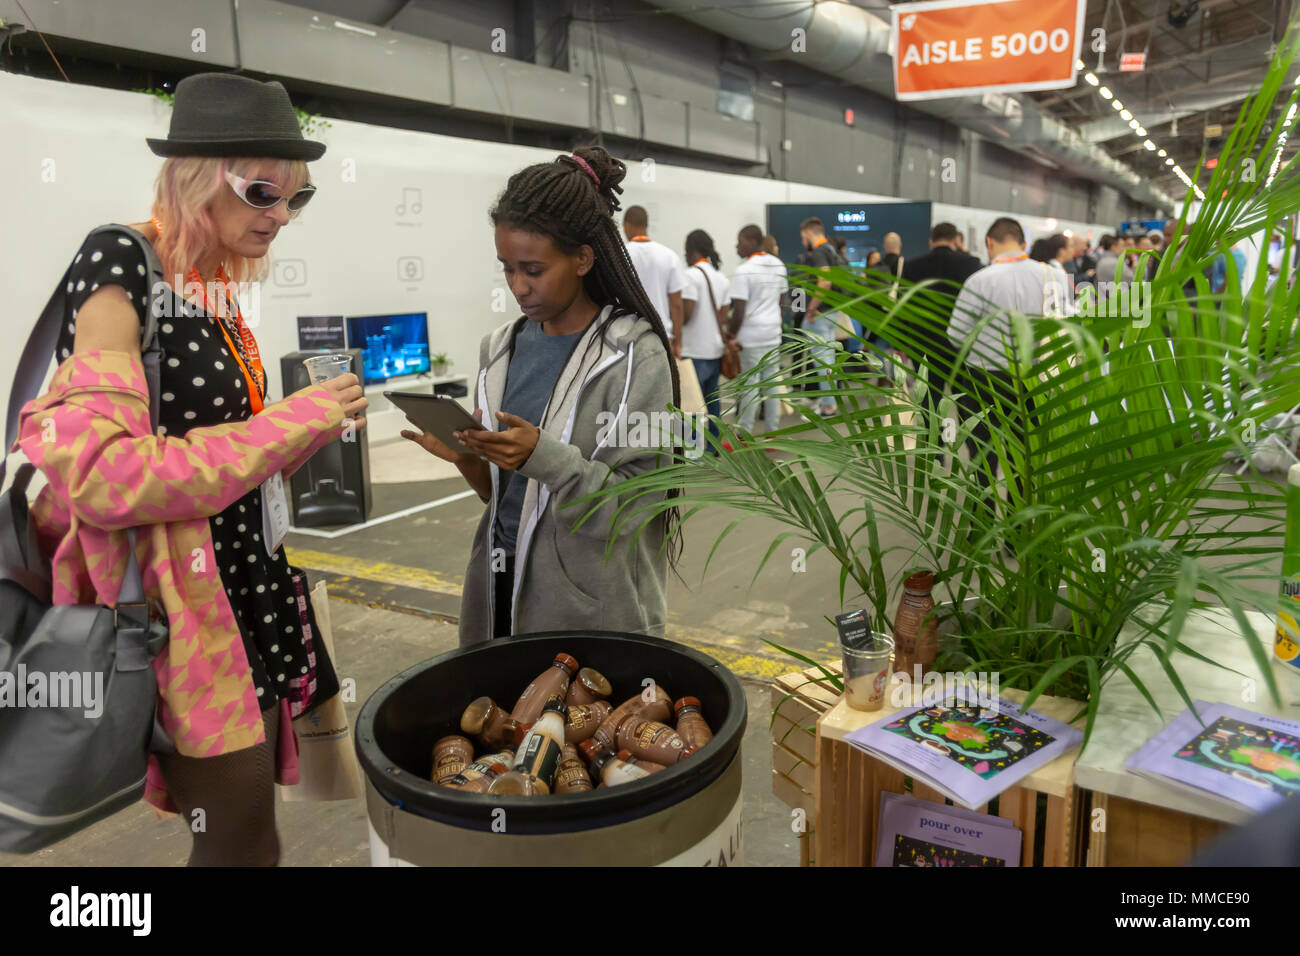 New York, USA. 10th May, 2018. Califia. plant-based milk booth at the TechDay New York event on Thursday, May 10, 2018. Thousands attended to seek jobs with the startups and to network with their peers, and perhaps to find the next big startup. TechDay bills itself as the U.S.'s largest startup event with over 500 exhibitors and over 20,000 attendees. (© Richard B. Levine) Credit: Richard Levine/Alamy Live News Stock Photo